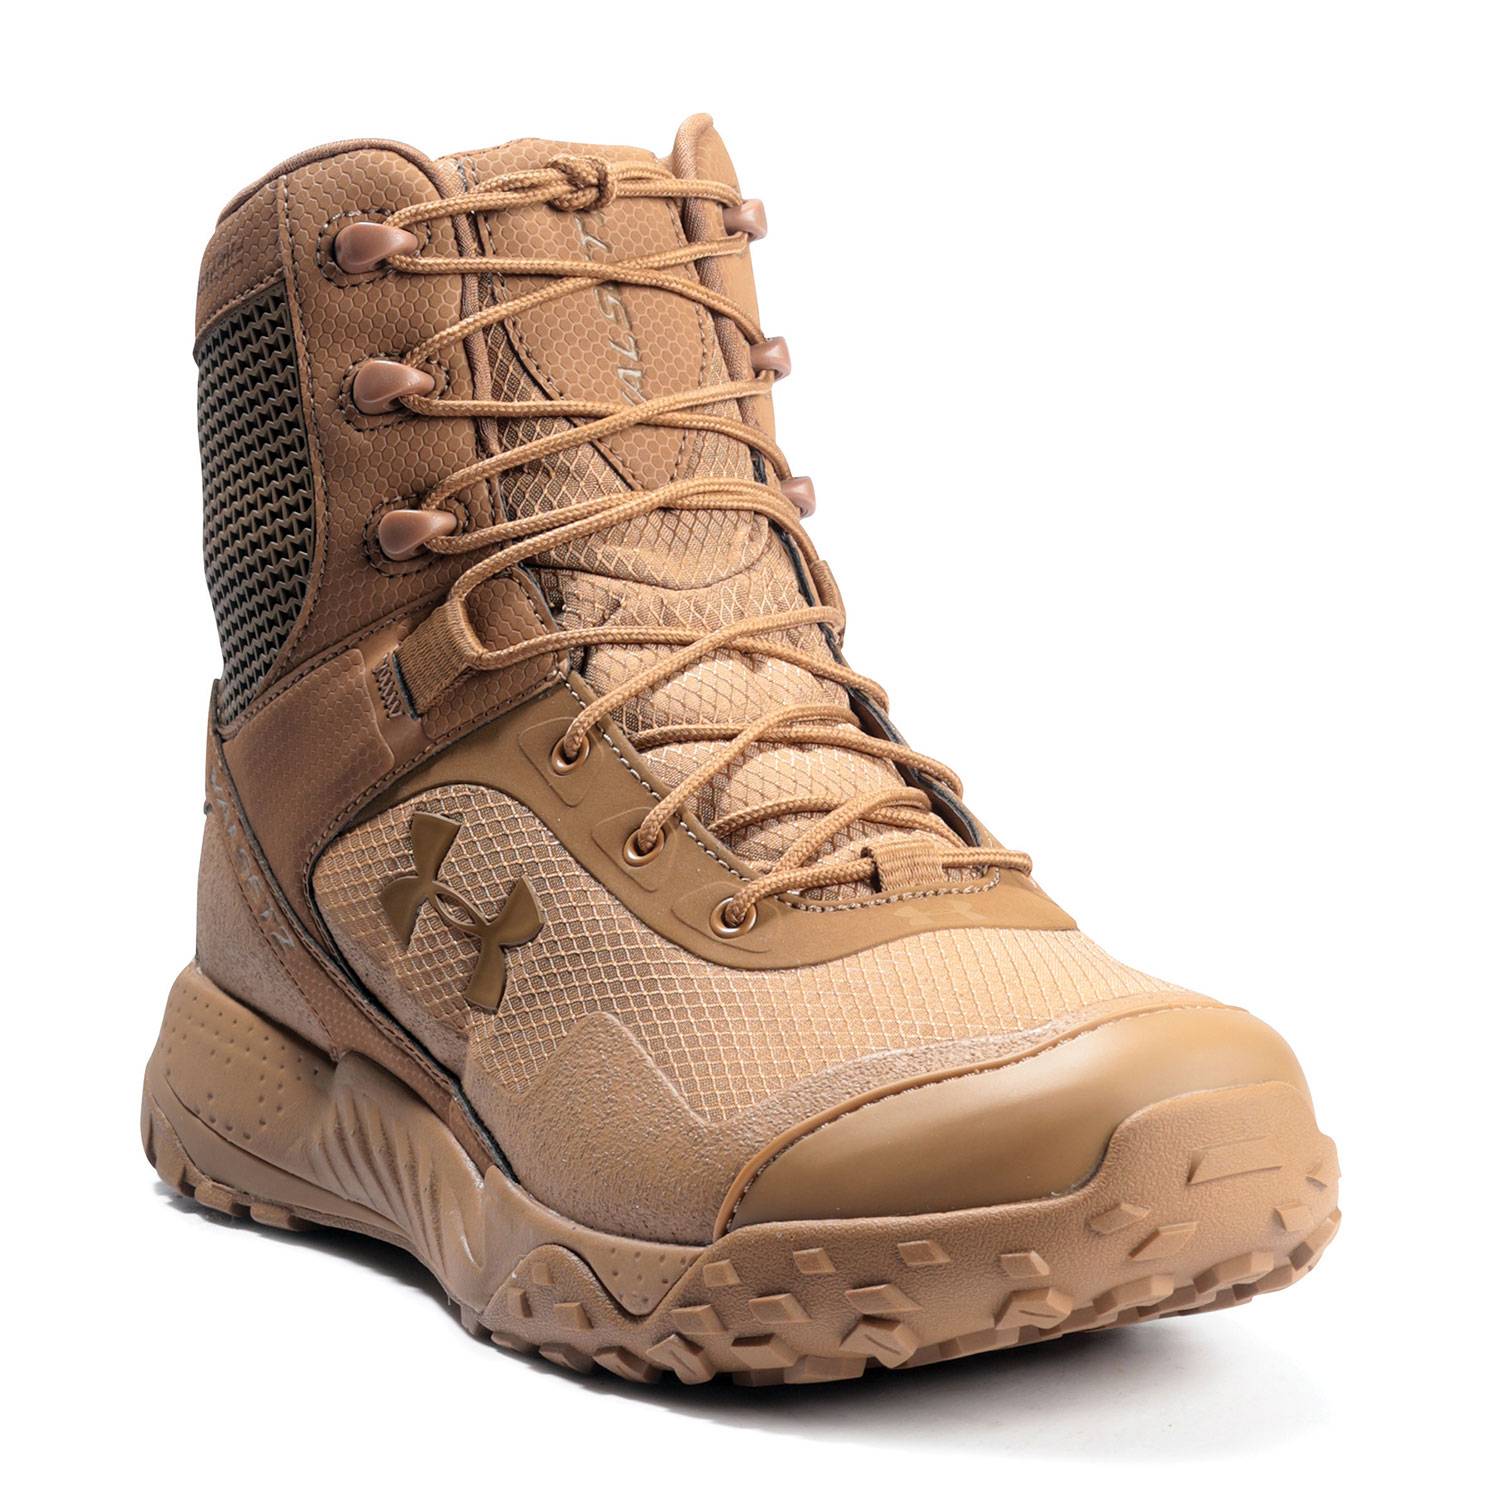 under armor women's tactical boots